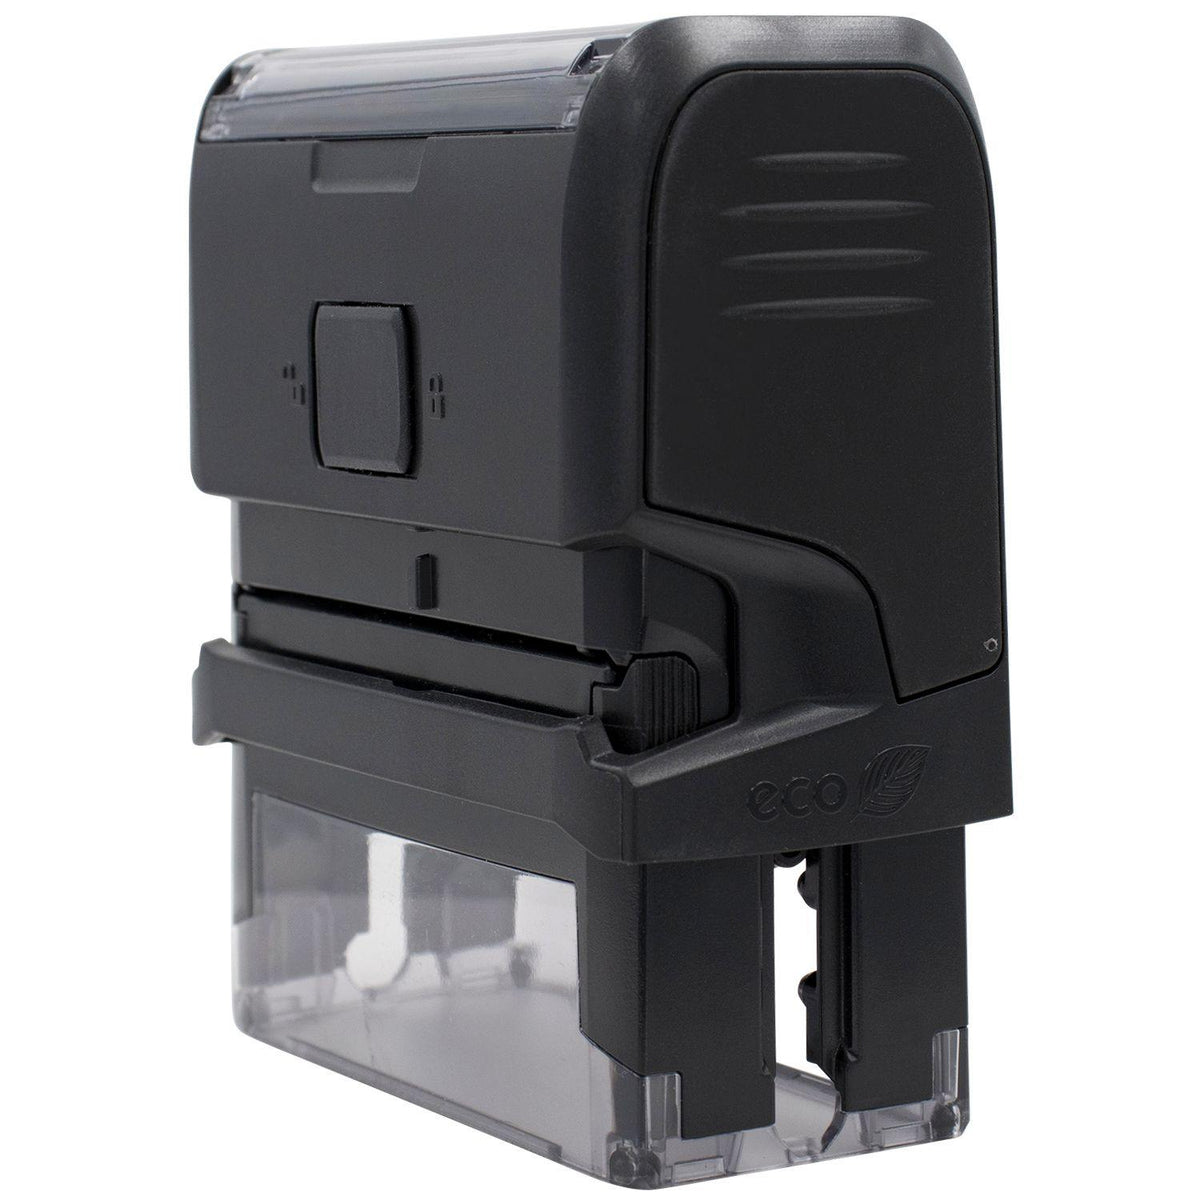 Side View of Large Self Inking Certified Copy Stamp at an Angle